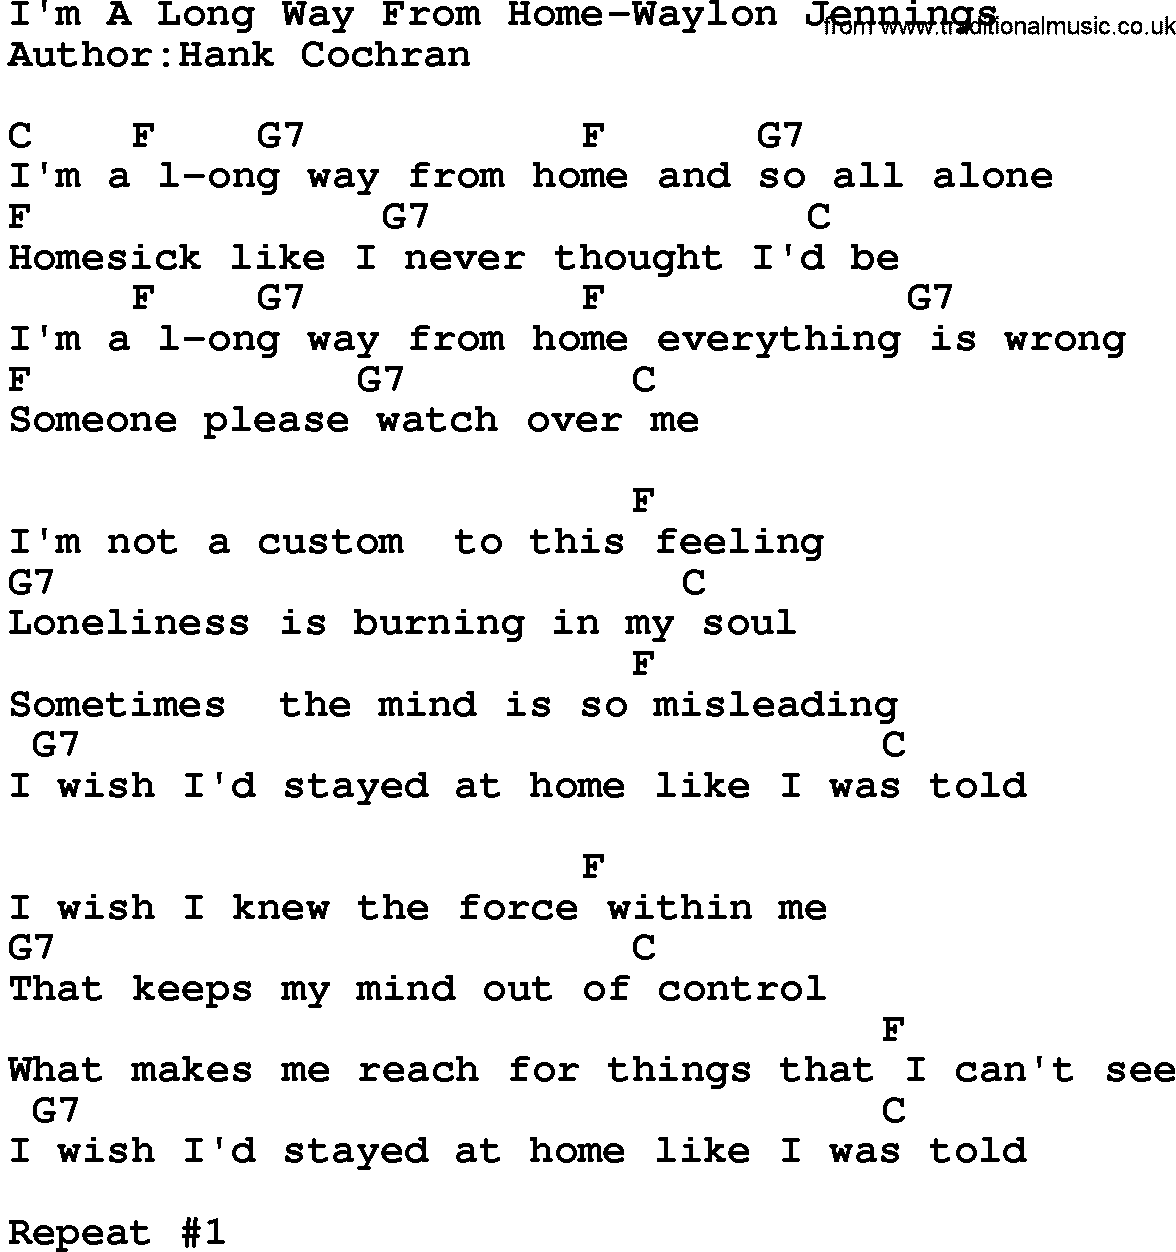 Country music song: I'm A Long Way From Home-Waylon Jennings lyrics and chords